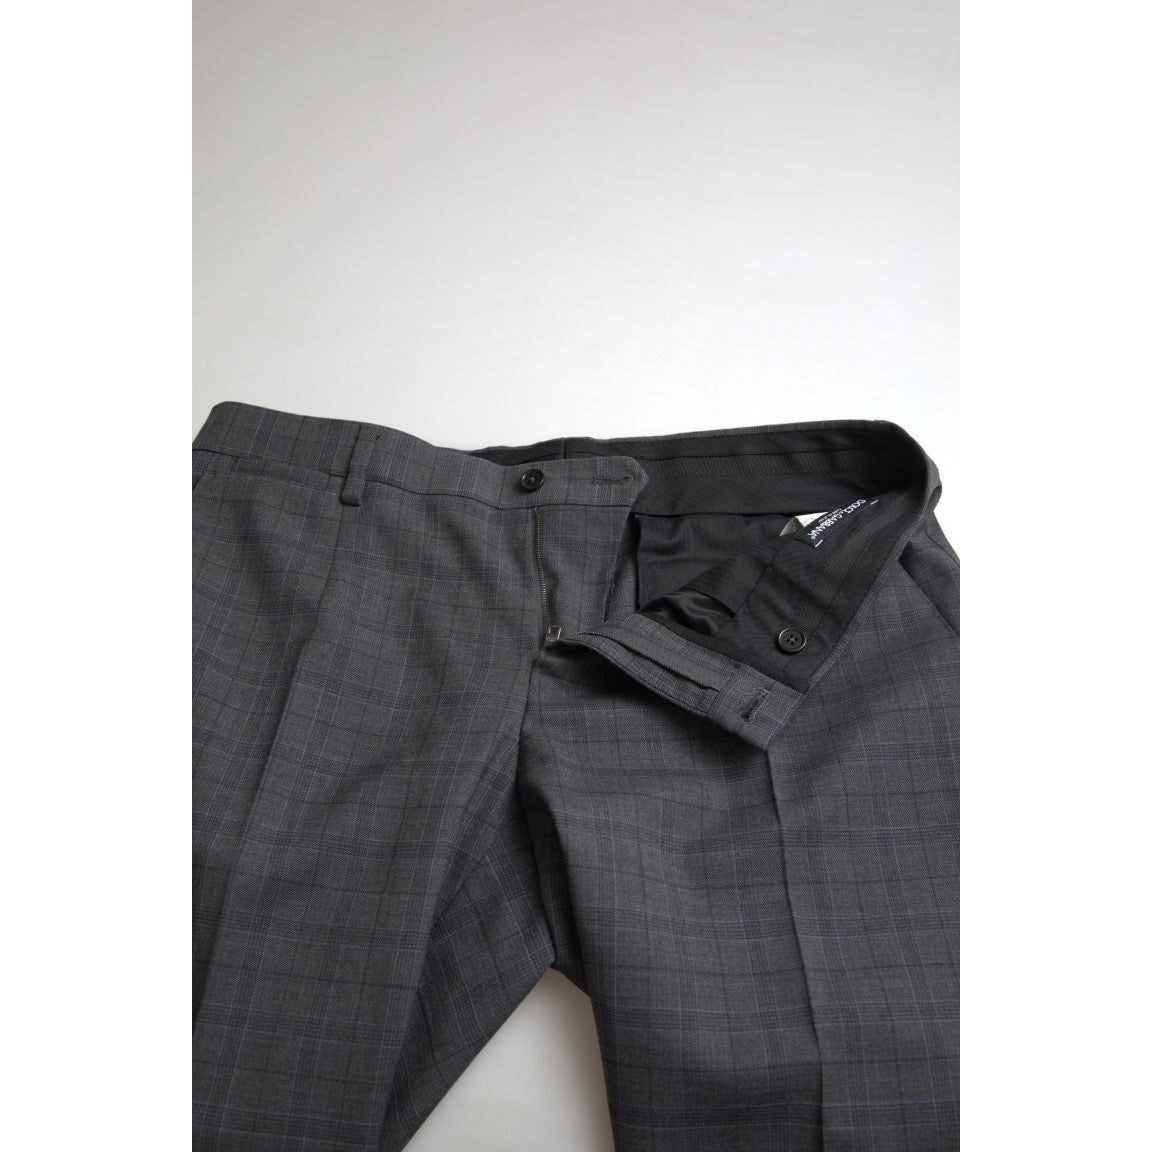 Dolce & Gabbana Elegant Grey Checkered Slim Fit Suit gray-2-piece-single-breasted-martini-suit